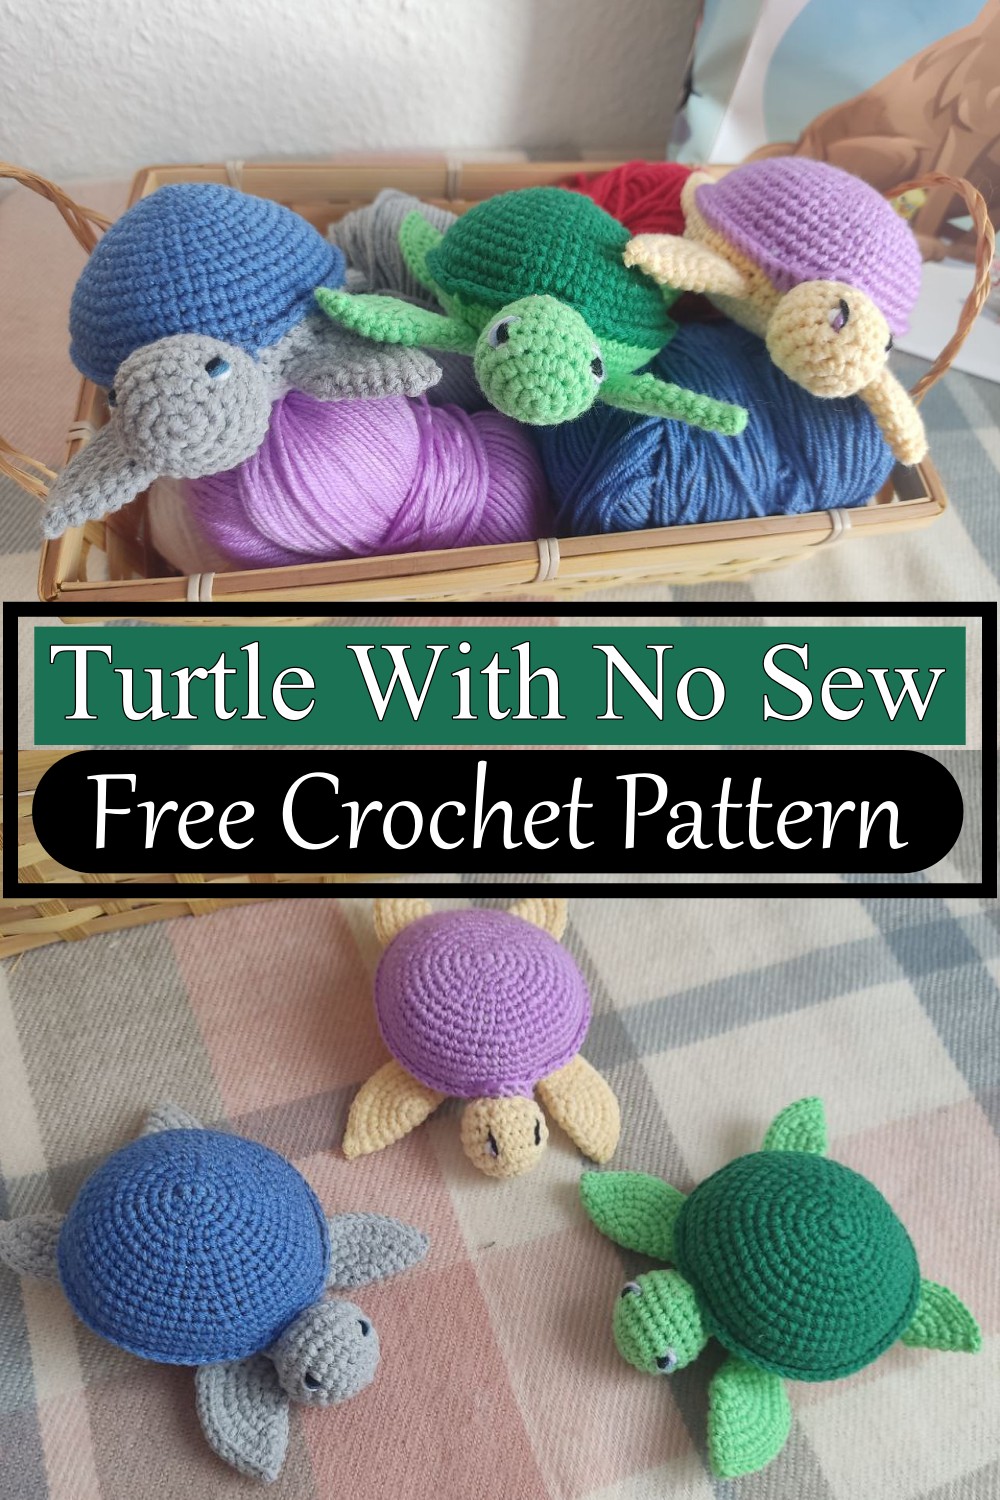 Crochet Turtle With No Sew